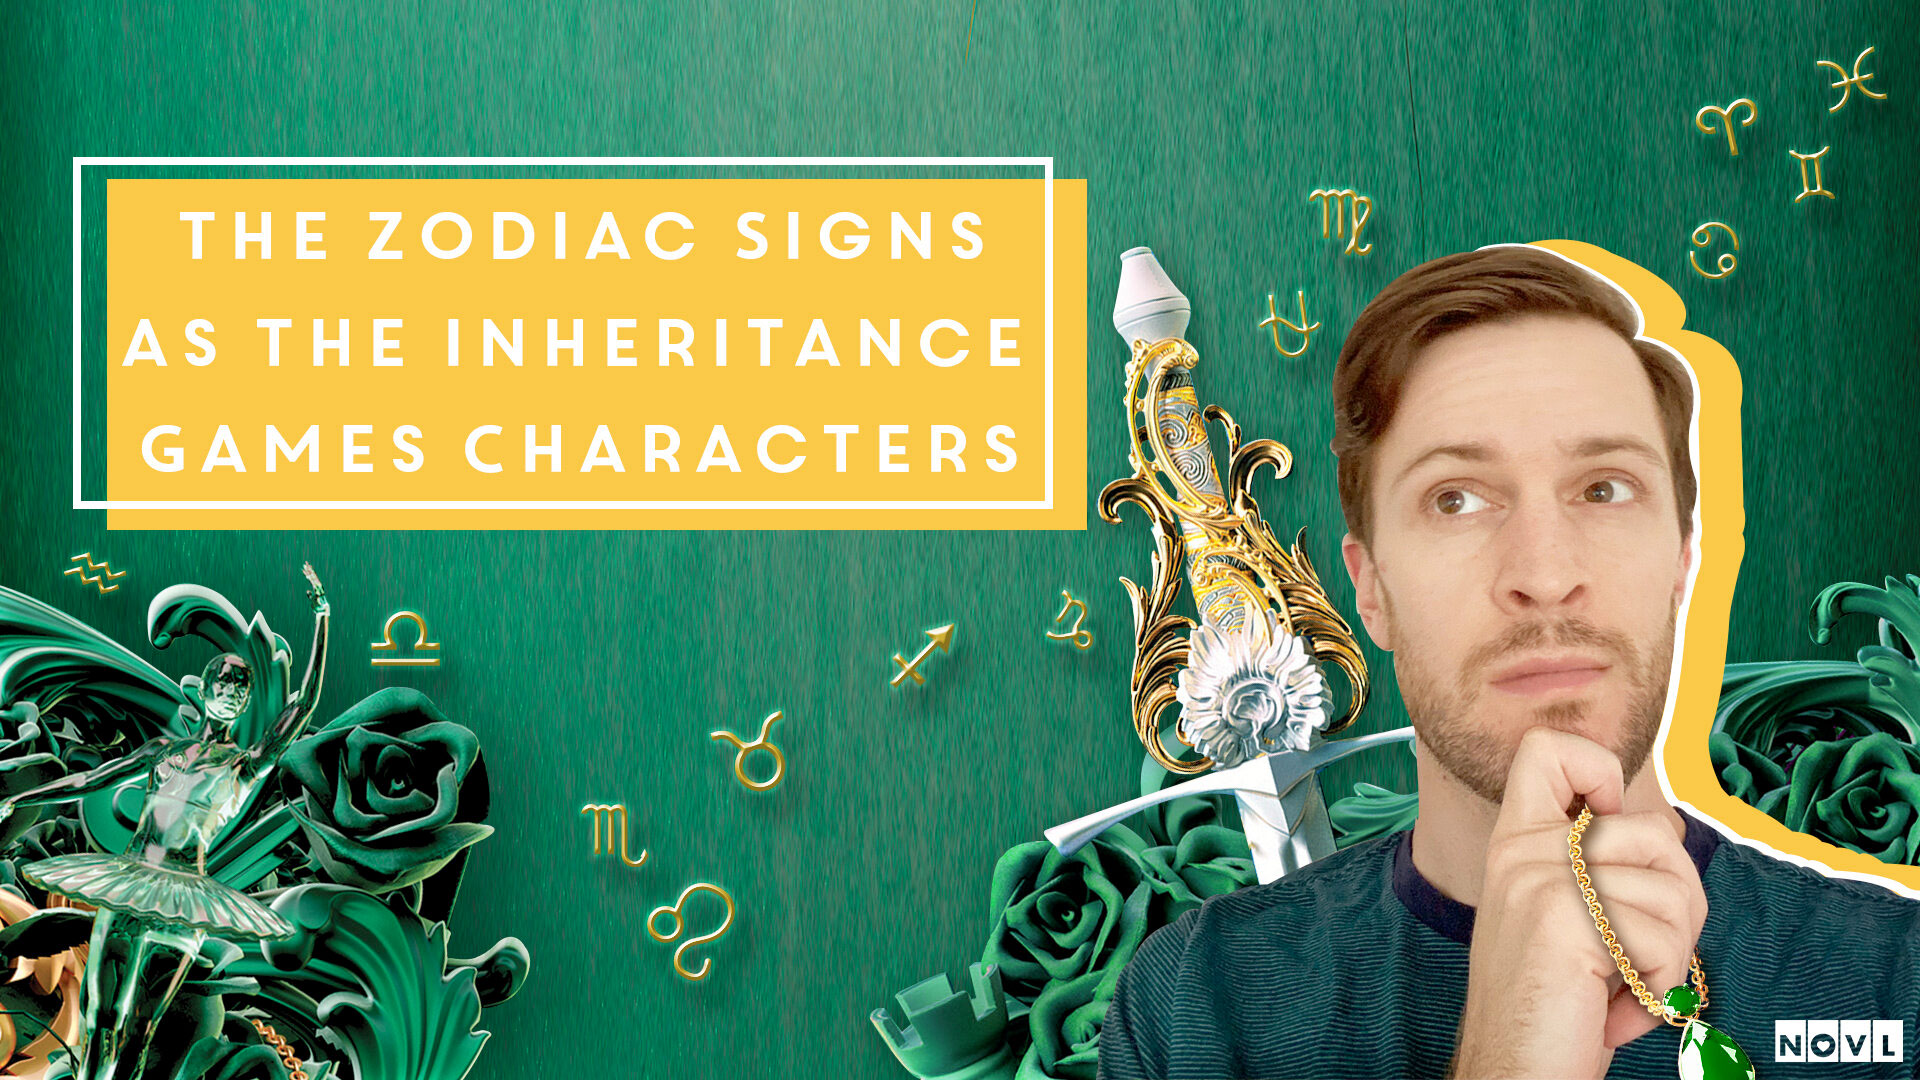 The NOVL Blog, Featured Image for Article: The Zodiac Signs as The Inheritance Games Characters